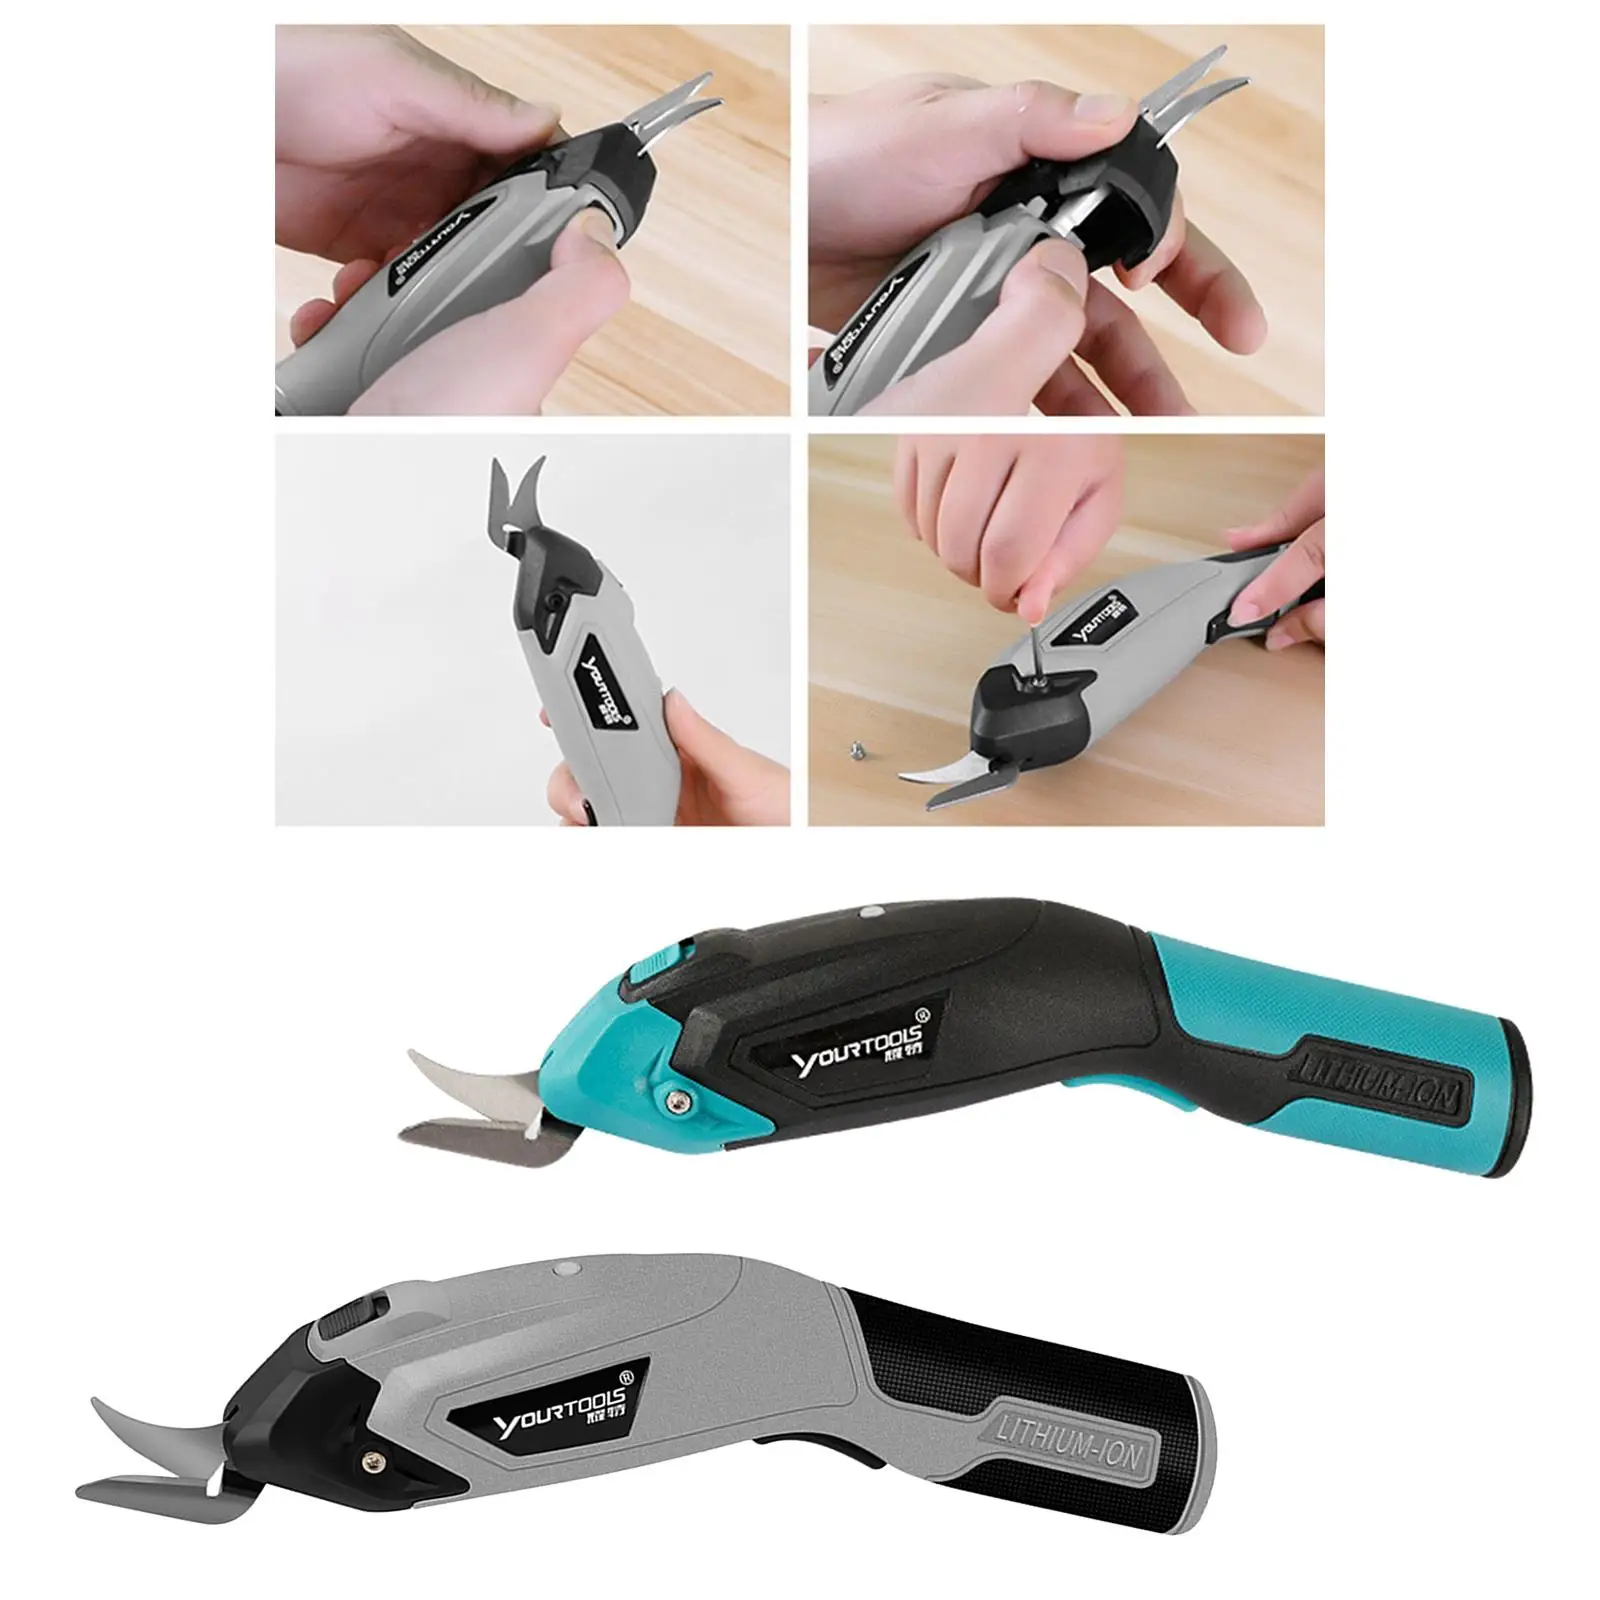   Scissors - Electric  Cutter for Sewing Crafting Fabric Paper Cardboard crafts